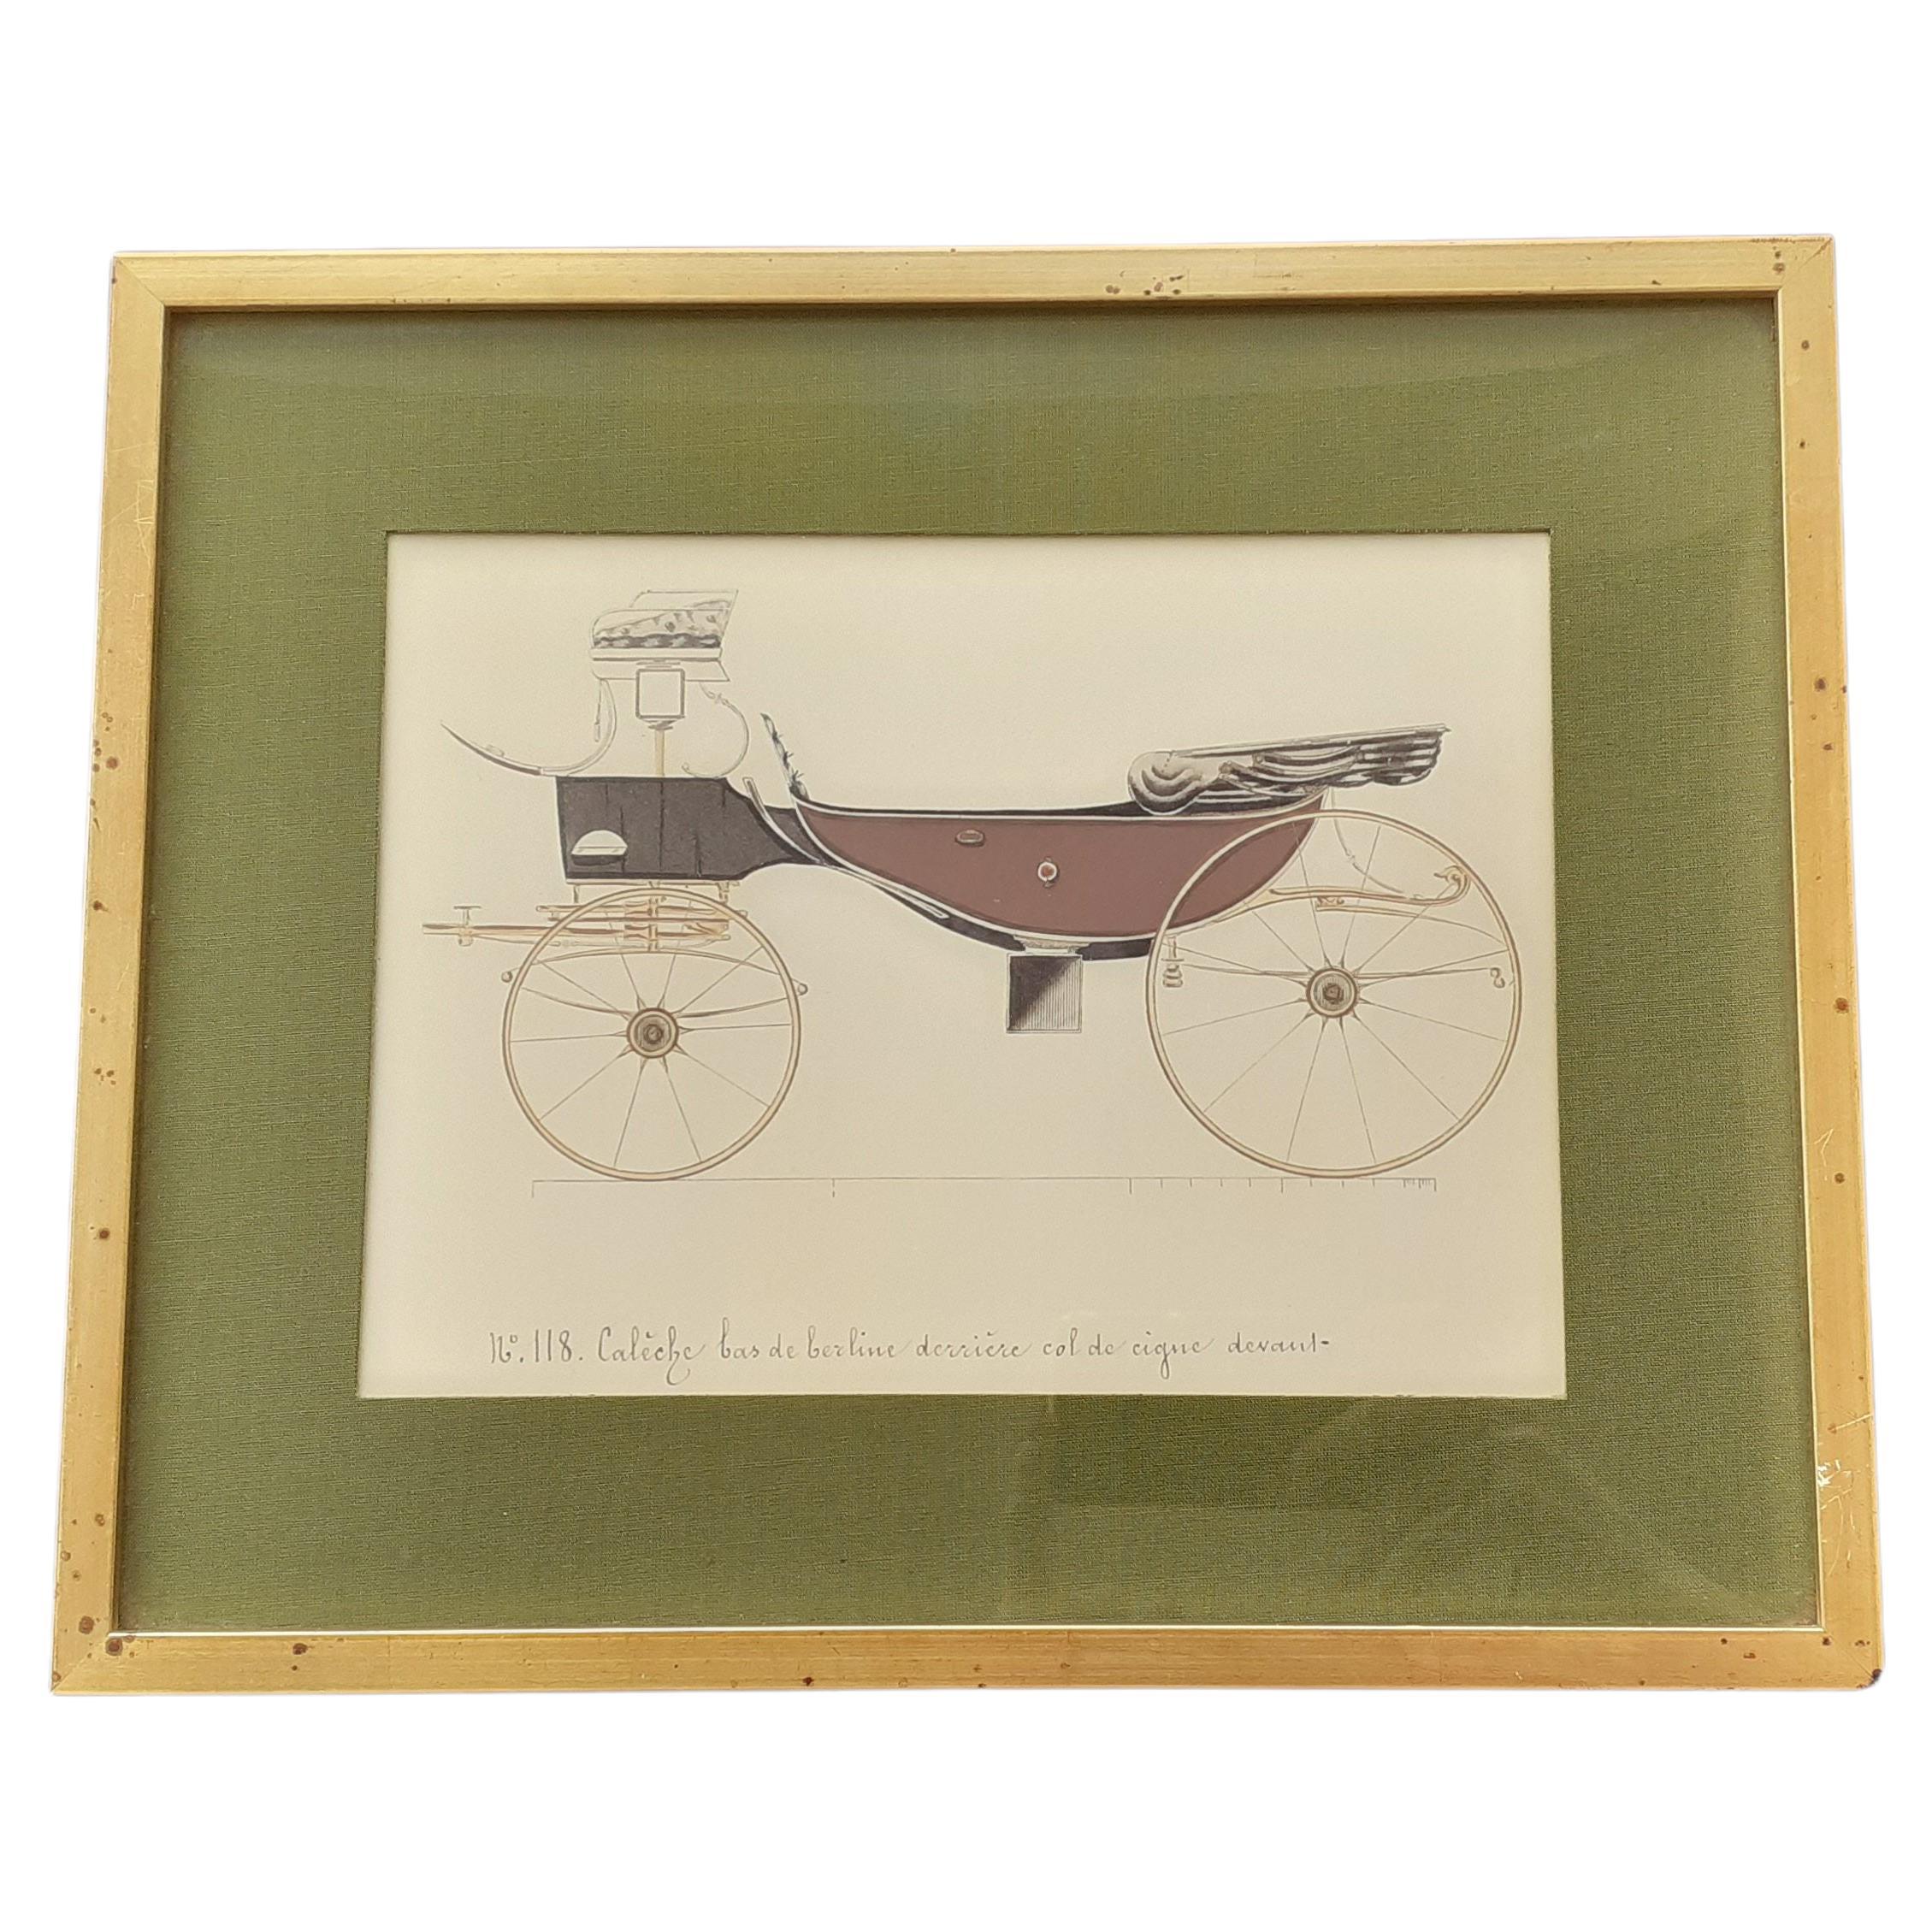 Rare opportunity to get 2 drawings from the Hermès Collection

Prints: Carriages

First one: 